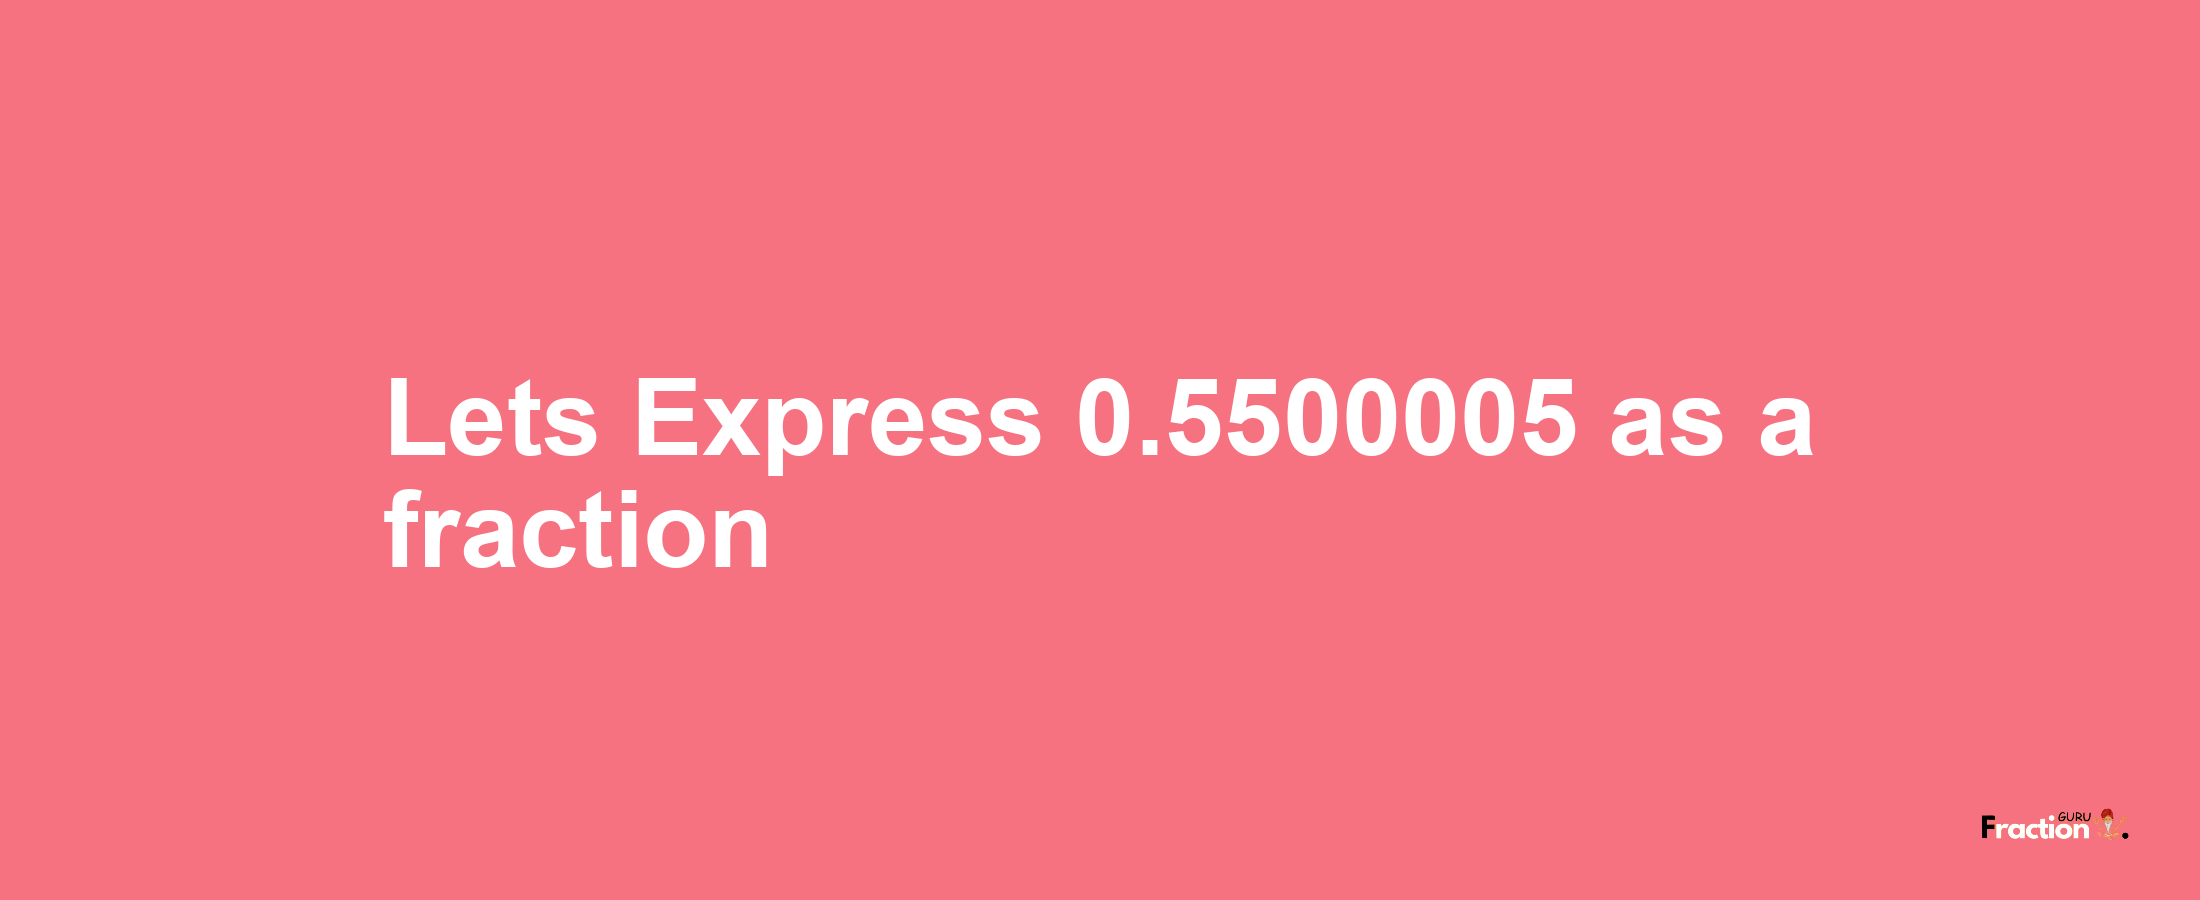 Lets Express 0.5500005 as afraction